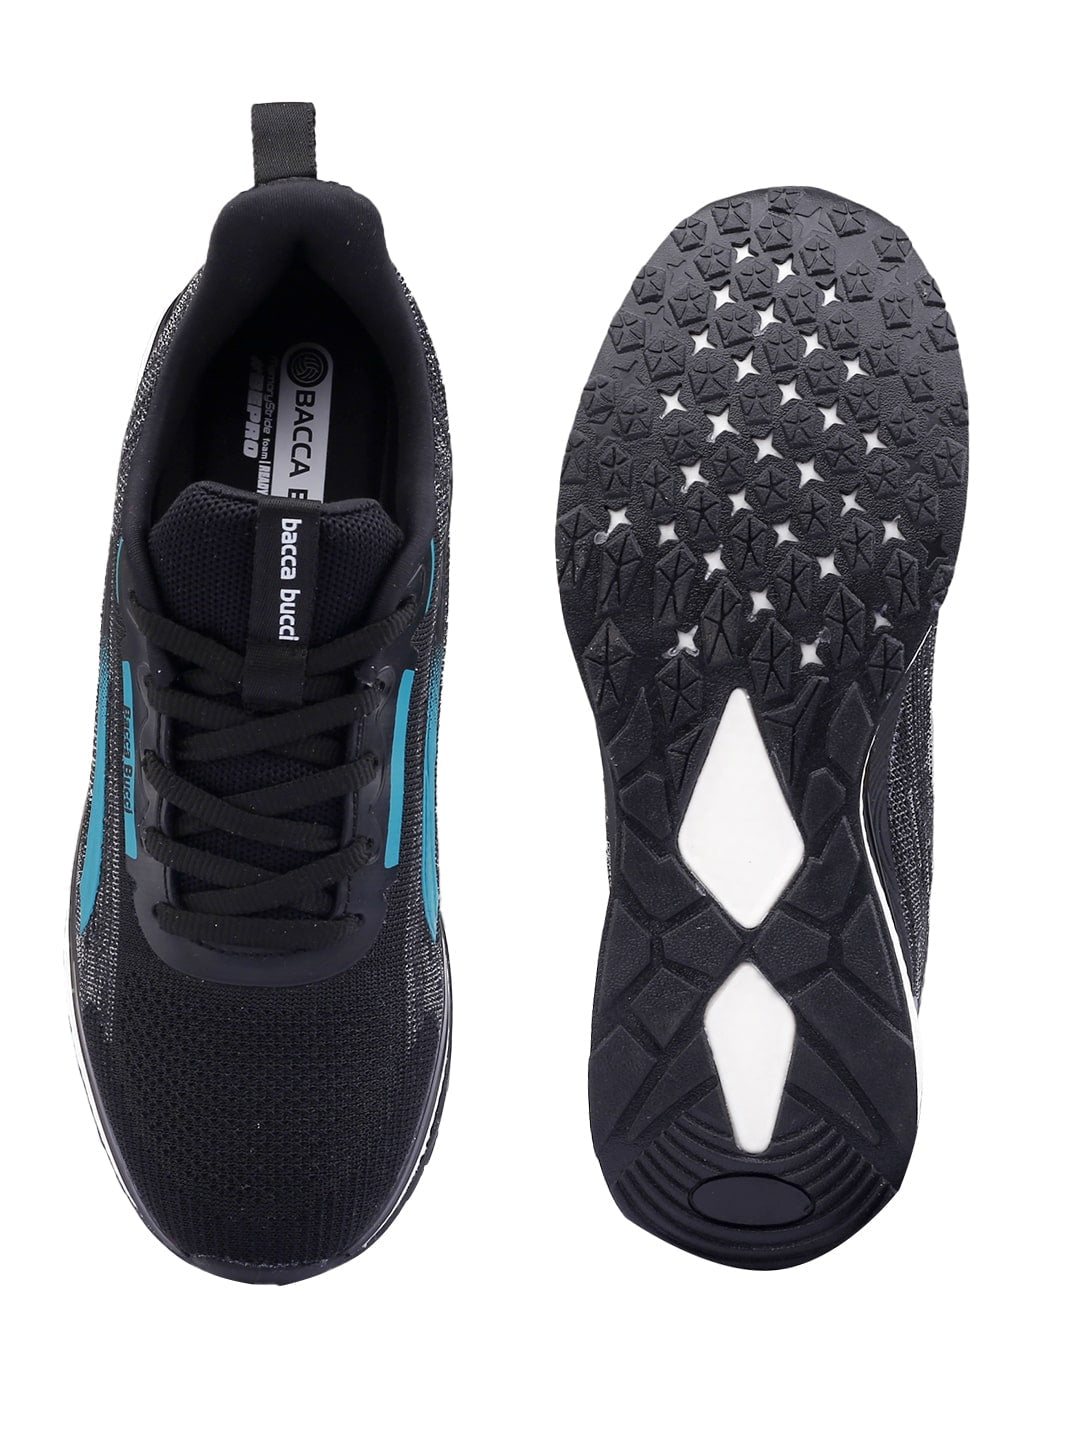 Bacca Bucci STRIDE MASTER: The Ultimate Fusion of Performance Shoes